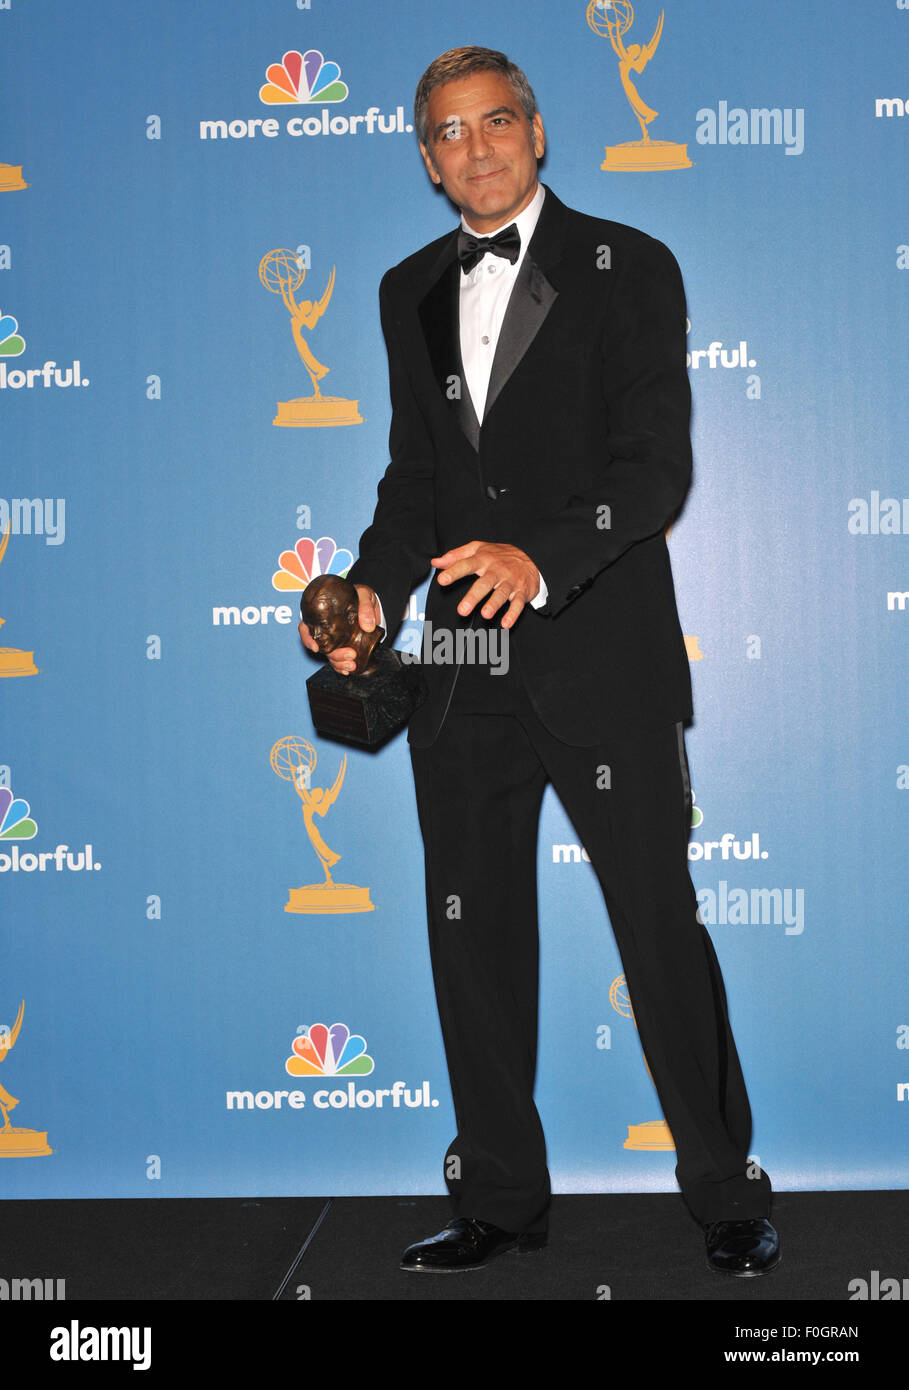 LOS ANGELES, CA - AUGUST 29, 2010: George Clooney at the 2010 Primetime Emmy Awards at the Nokia Theatre L.A. Live in downtown Los Angeles. Stock Photo